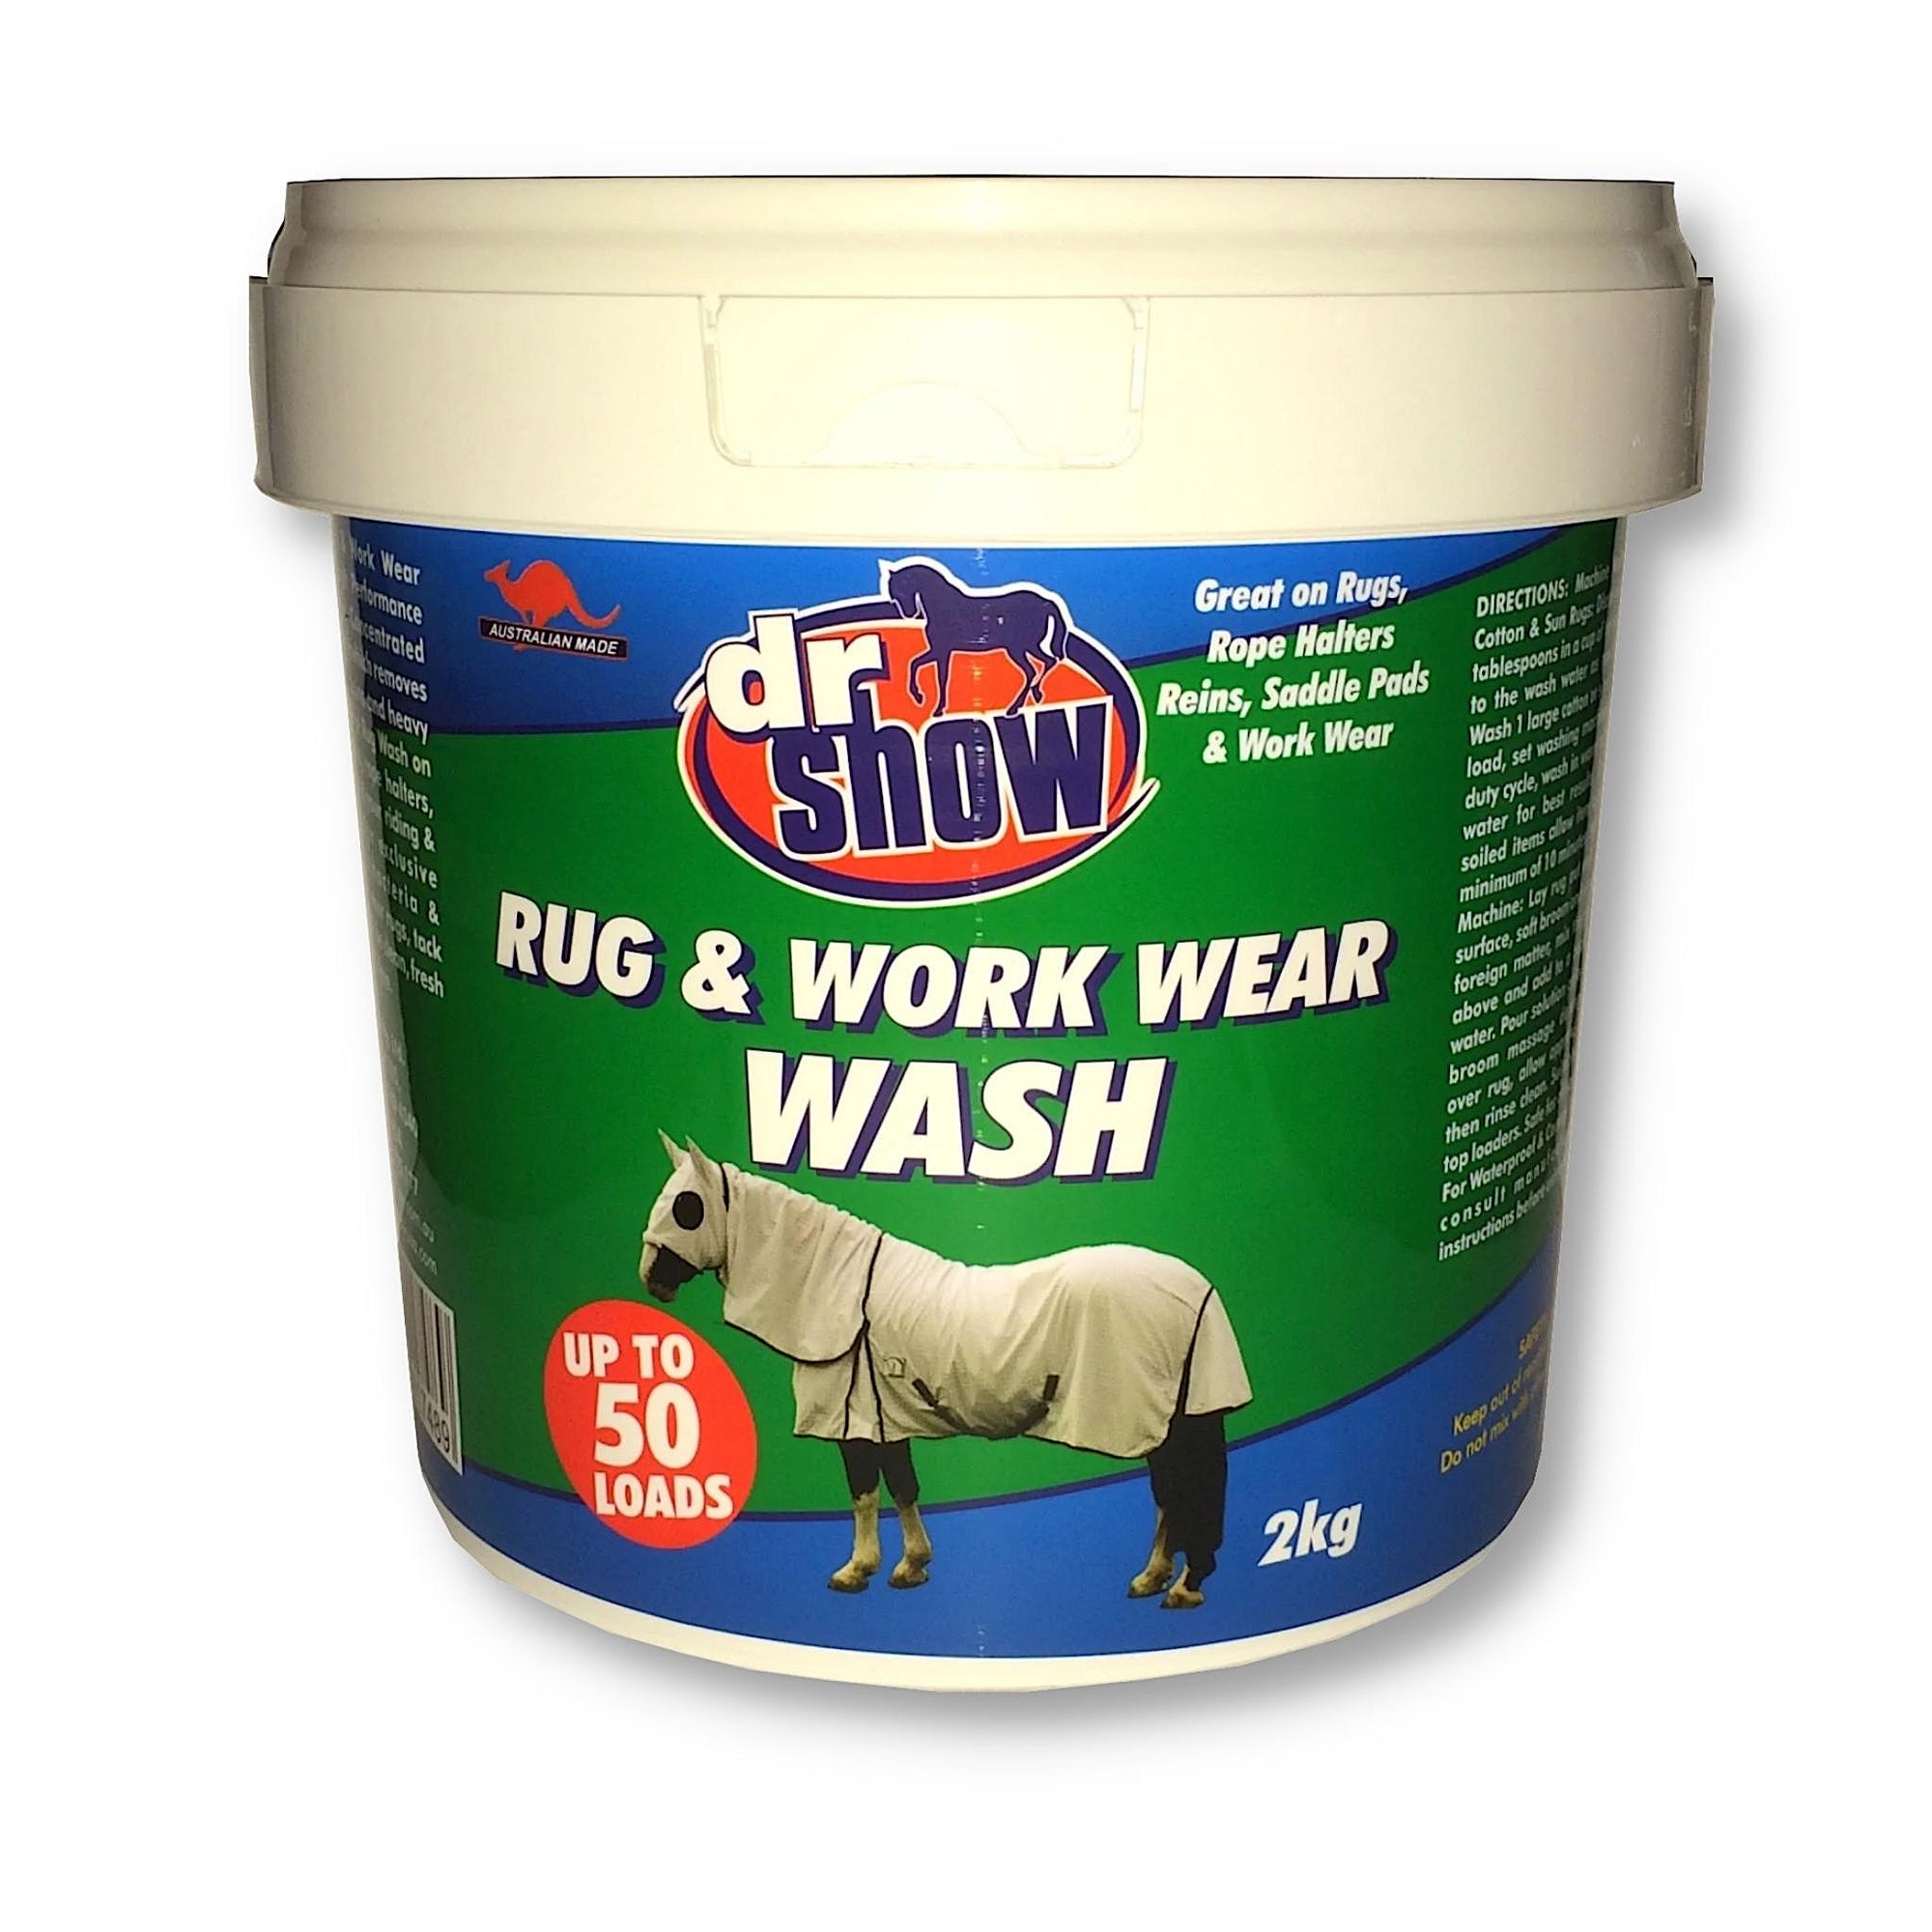 Tub of "Rug and Work Wear Wash."